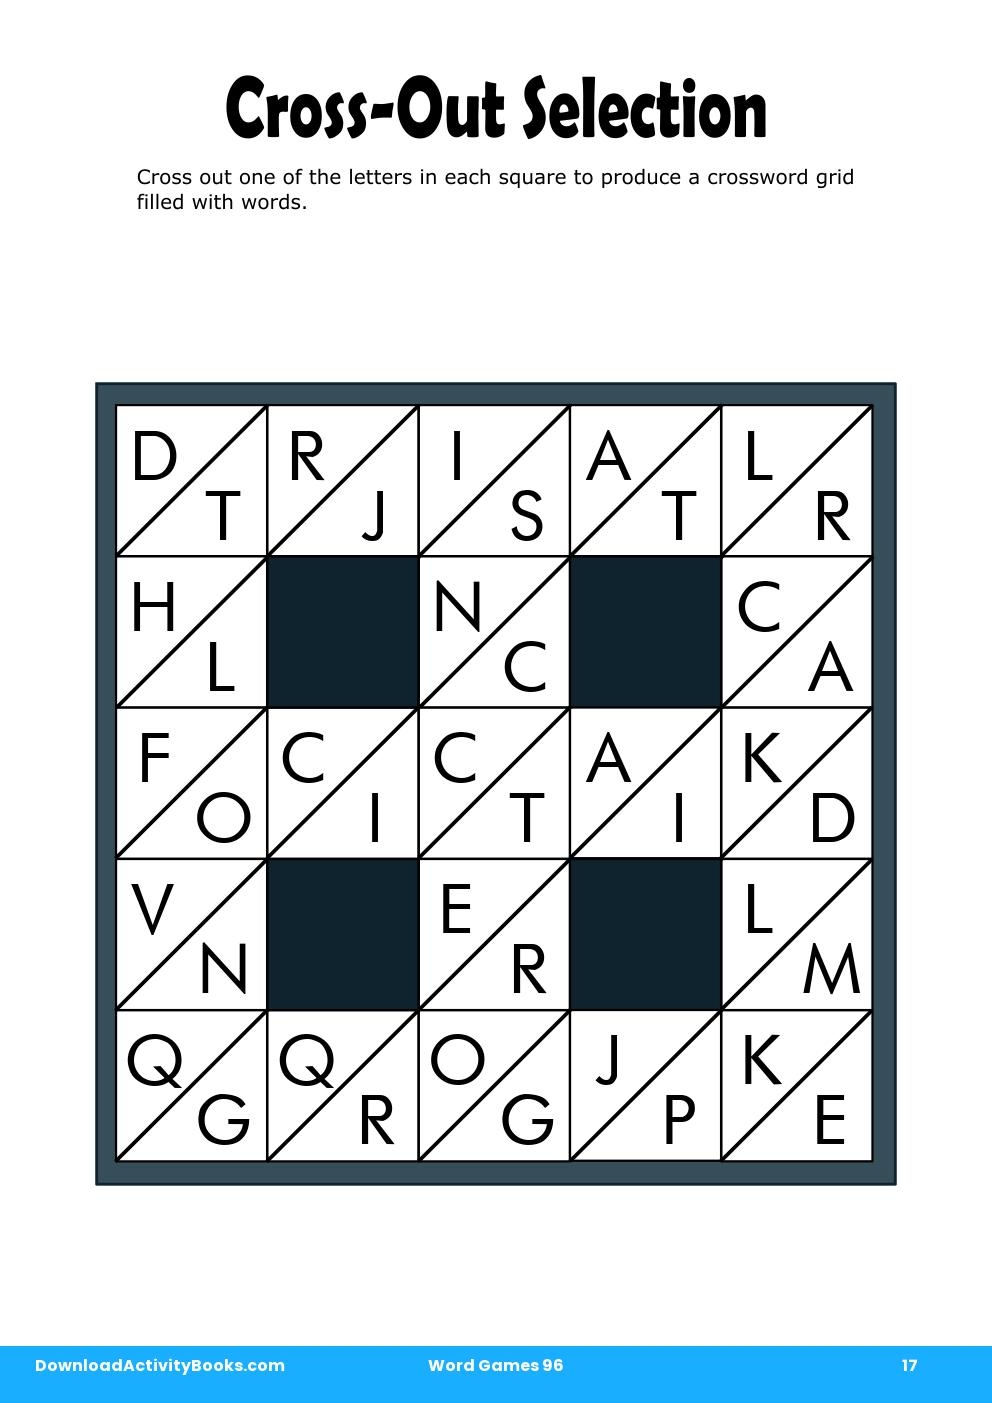 Cross-Out Selection in Word Games 96